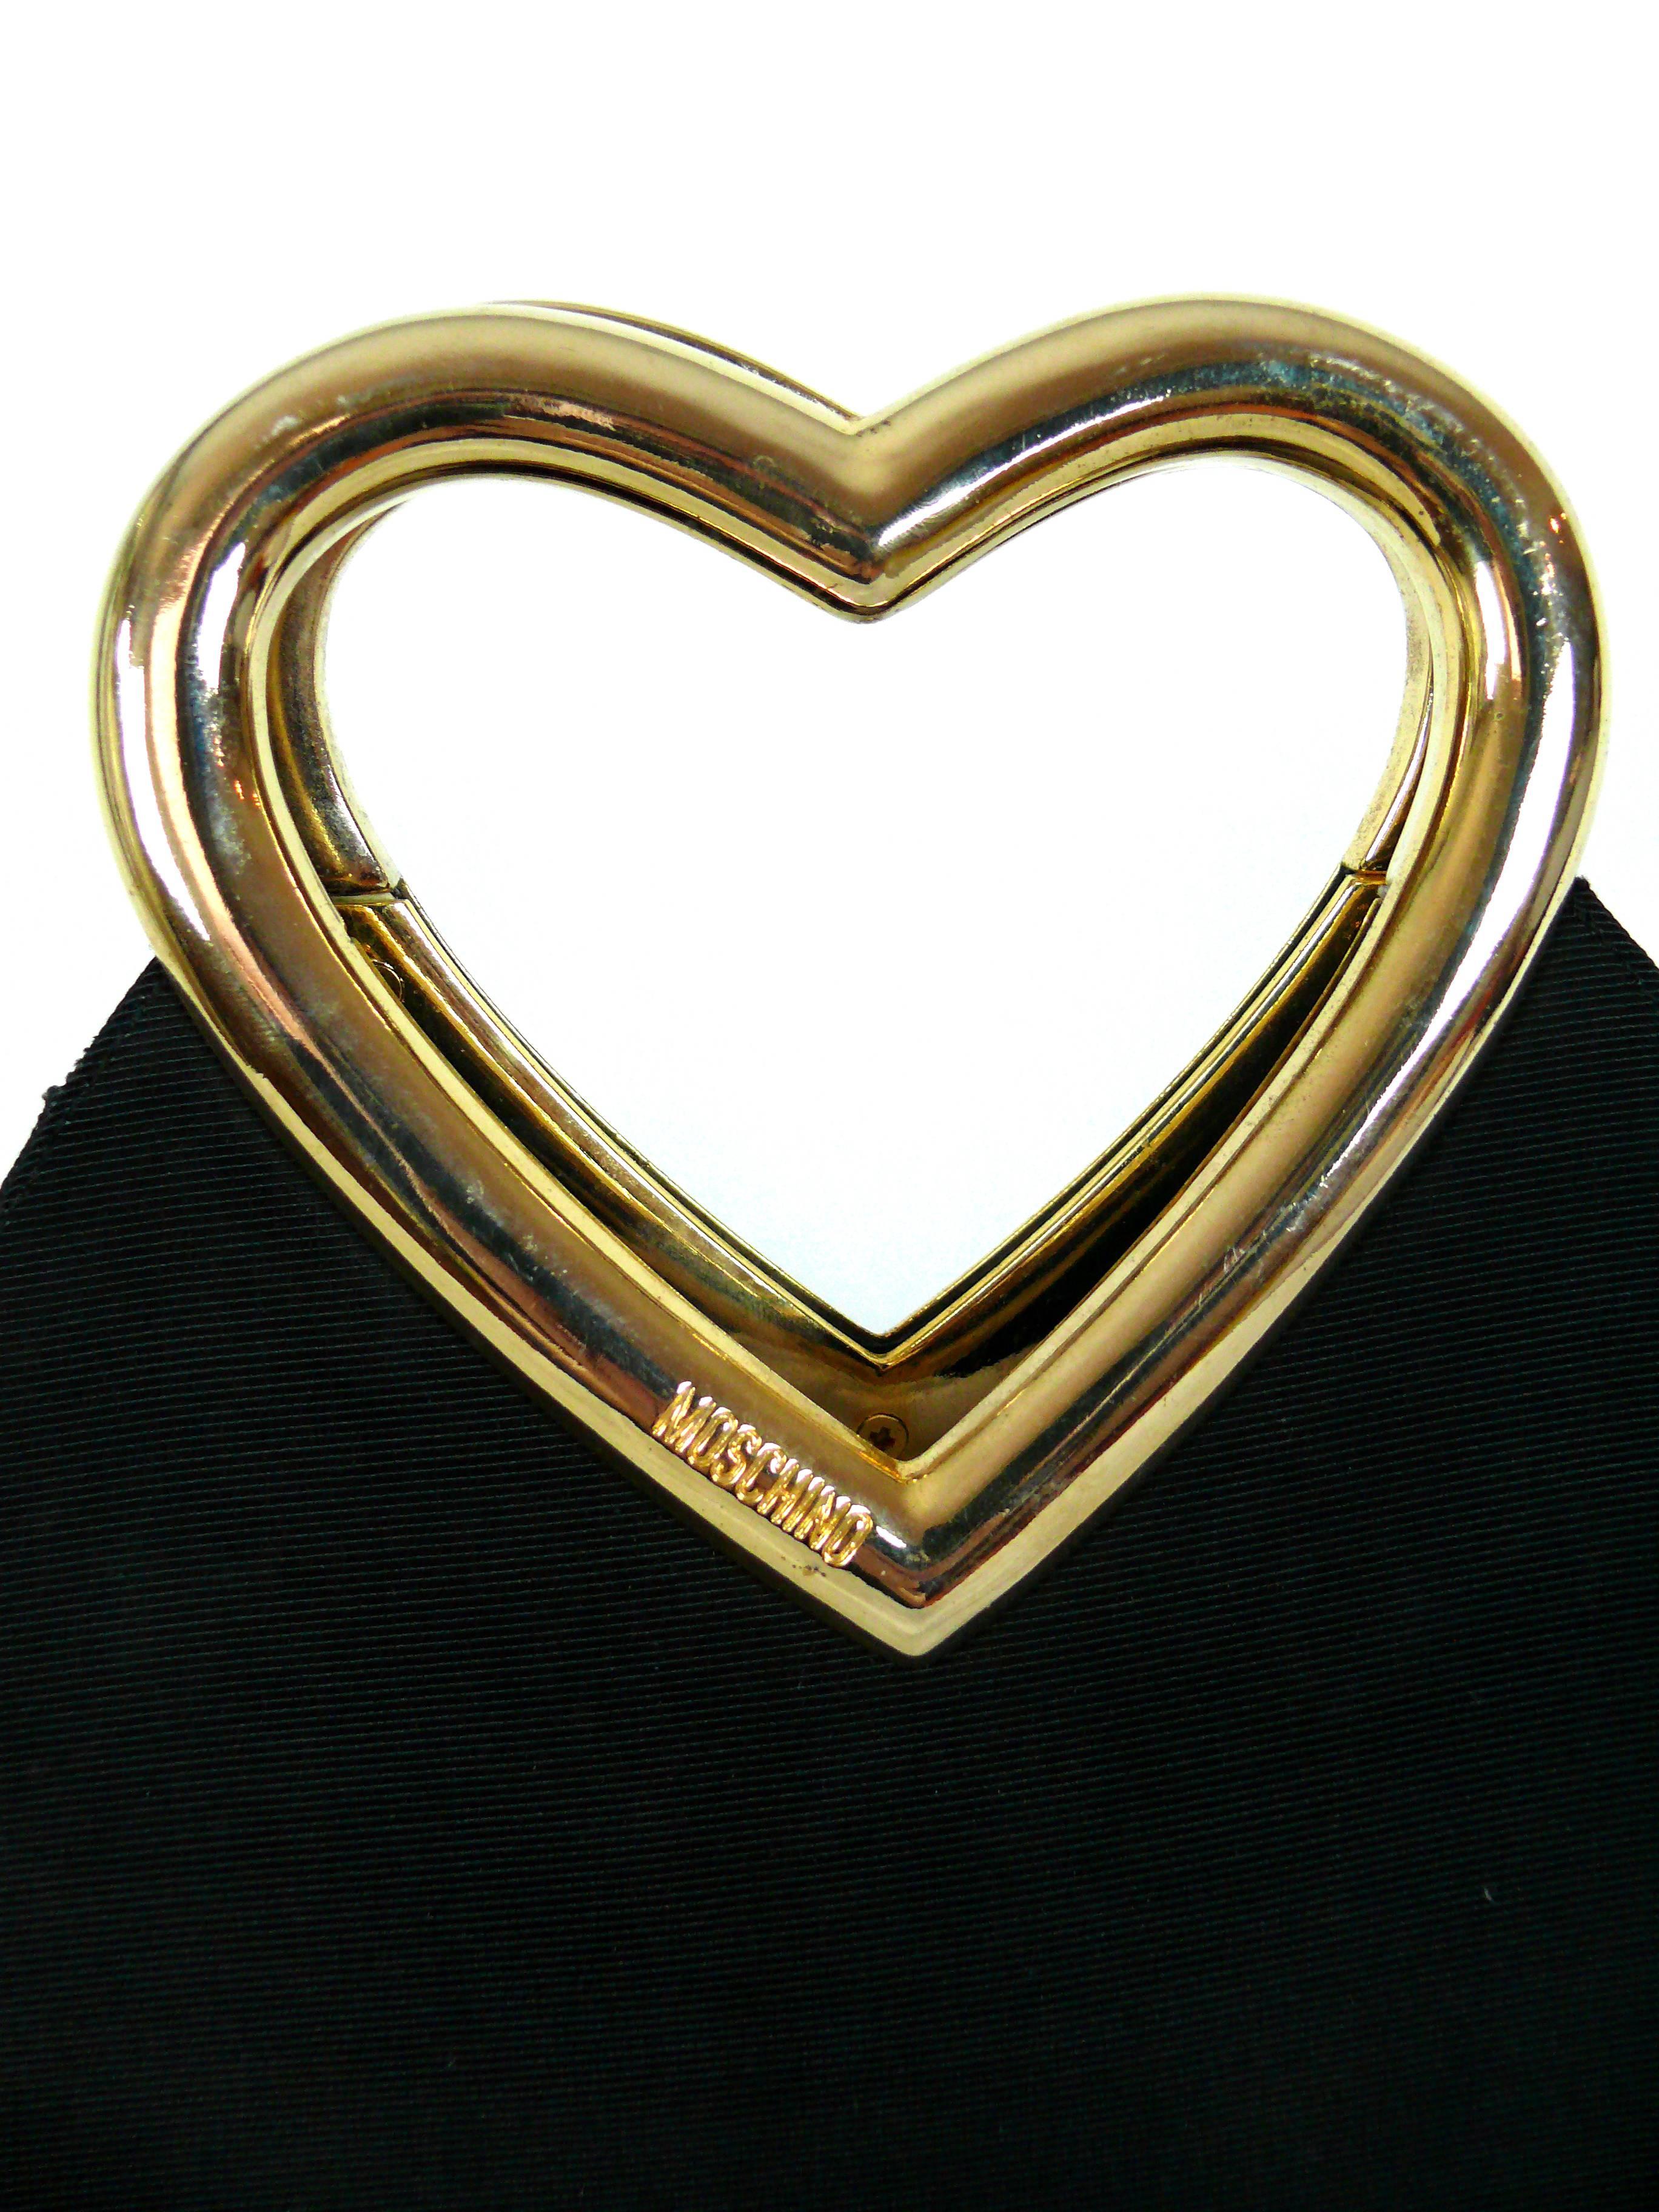 MOSCHINO vintage black ribbed nylon bag featuring a stunning gold tone rigid heart shaped handle.

One inside zip pocket.

Snap closure.

Embossed MOSCHINO on both sides of the handle.

Zip pull embossed Centropercento MOSCHINO REDWALL Made